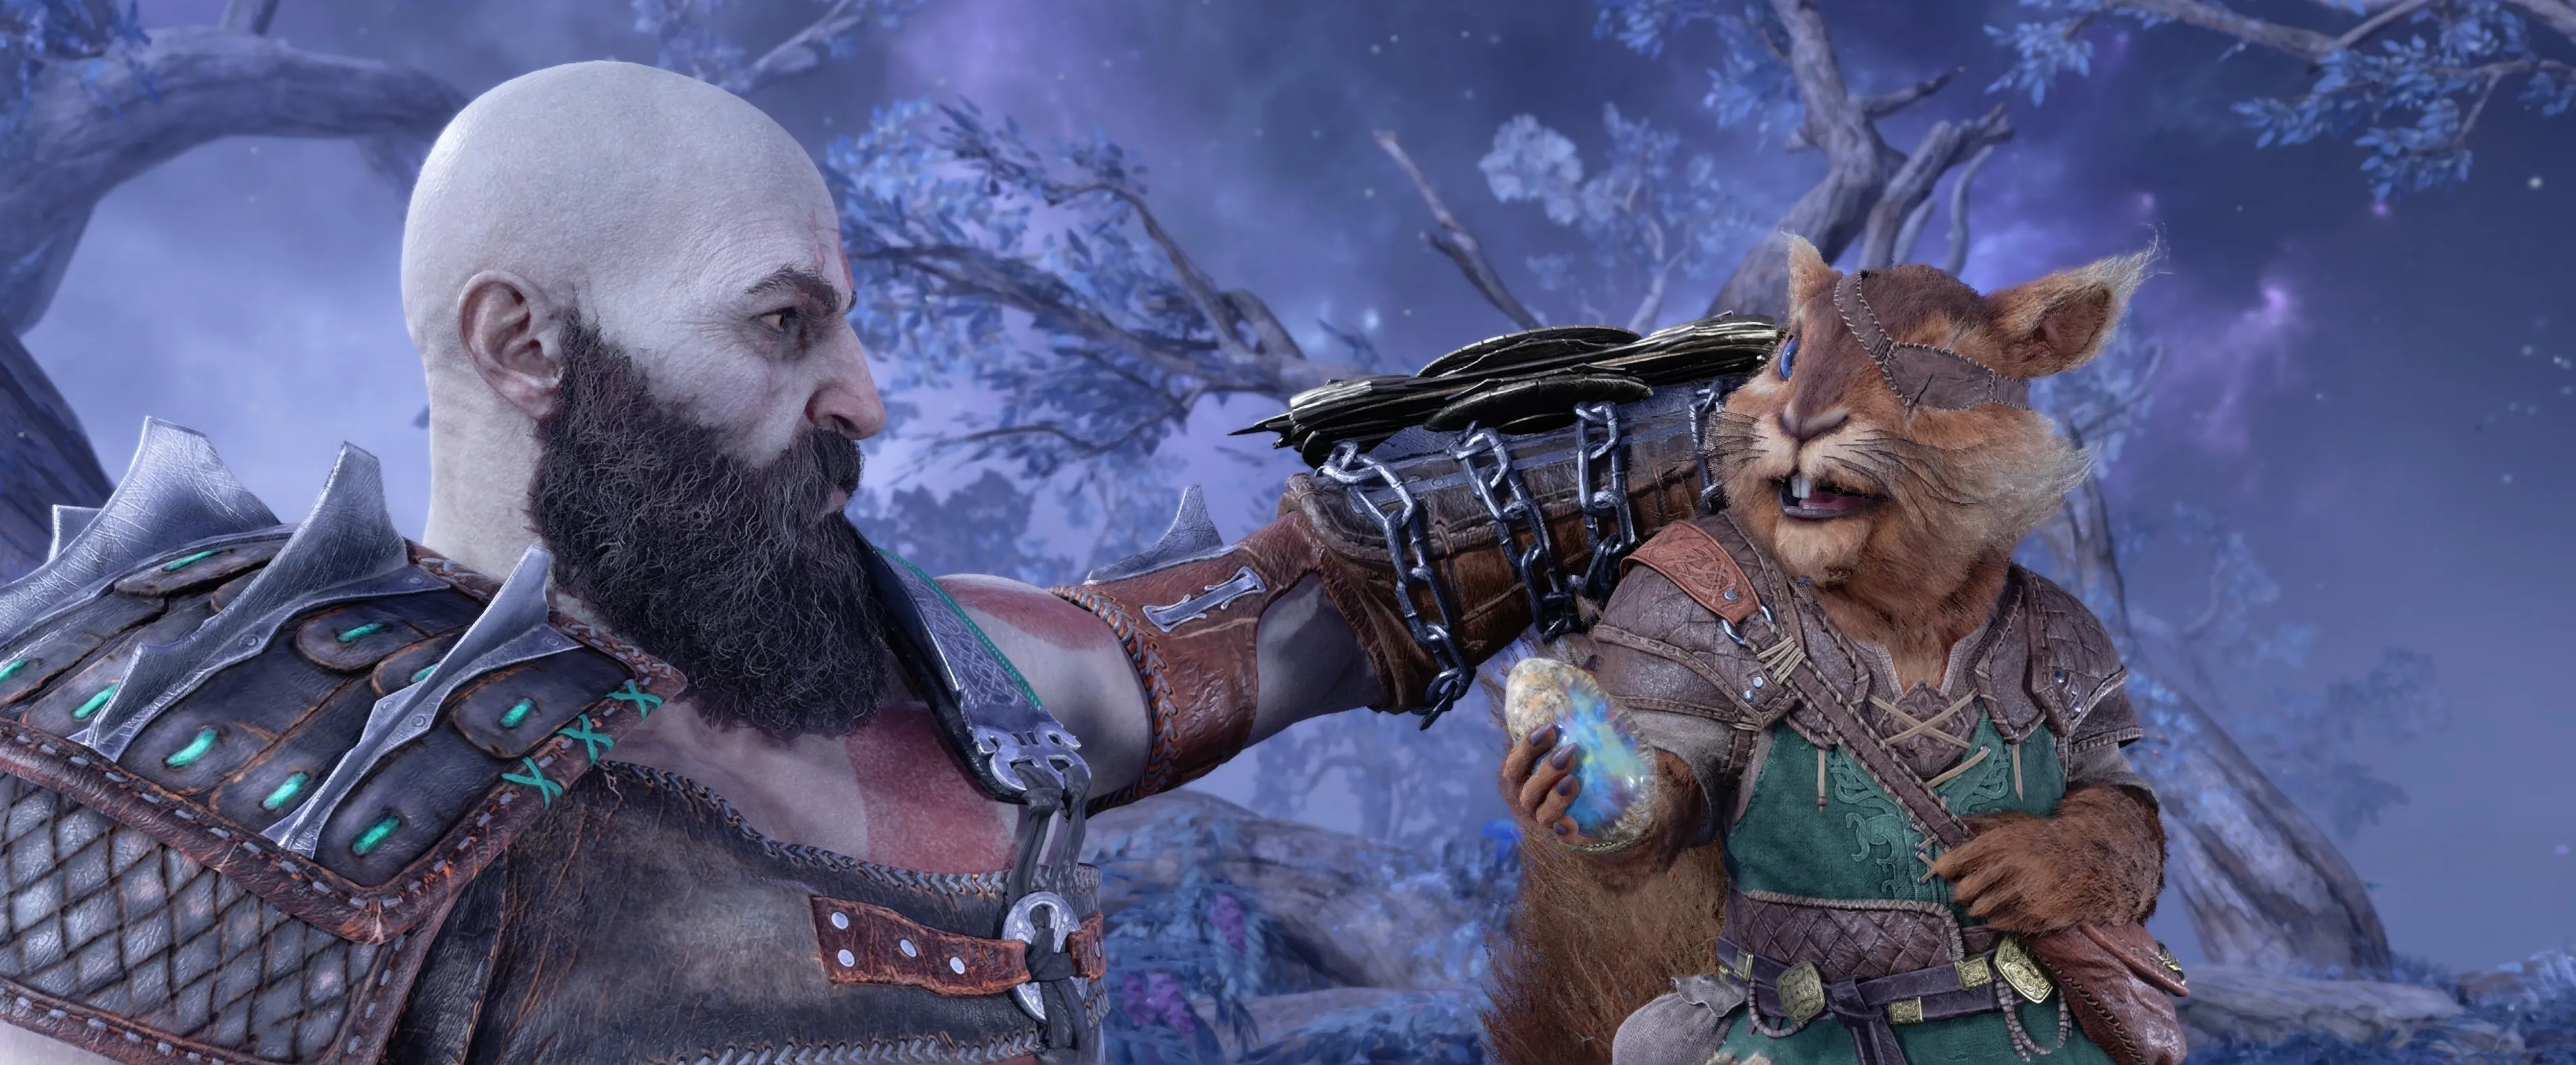 How to Play God of War Ragnarok on Pc?